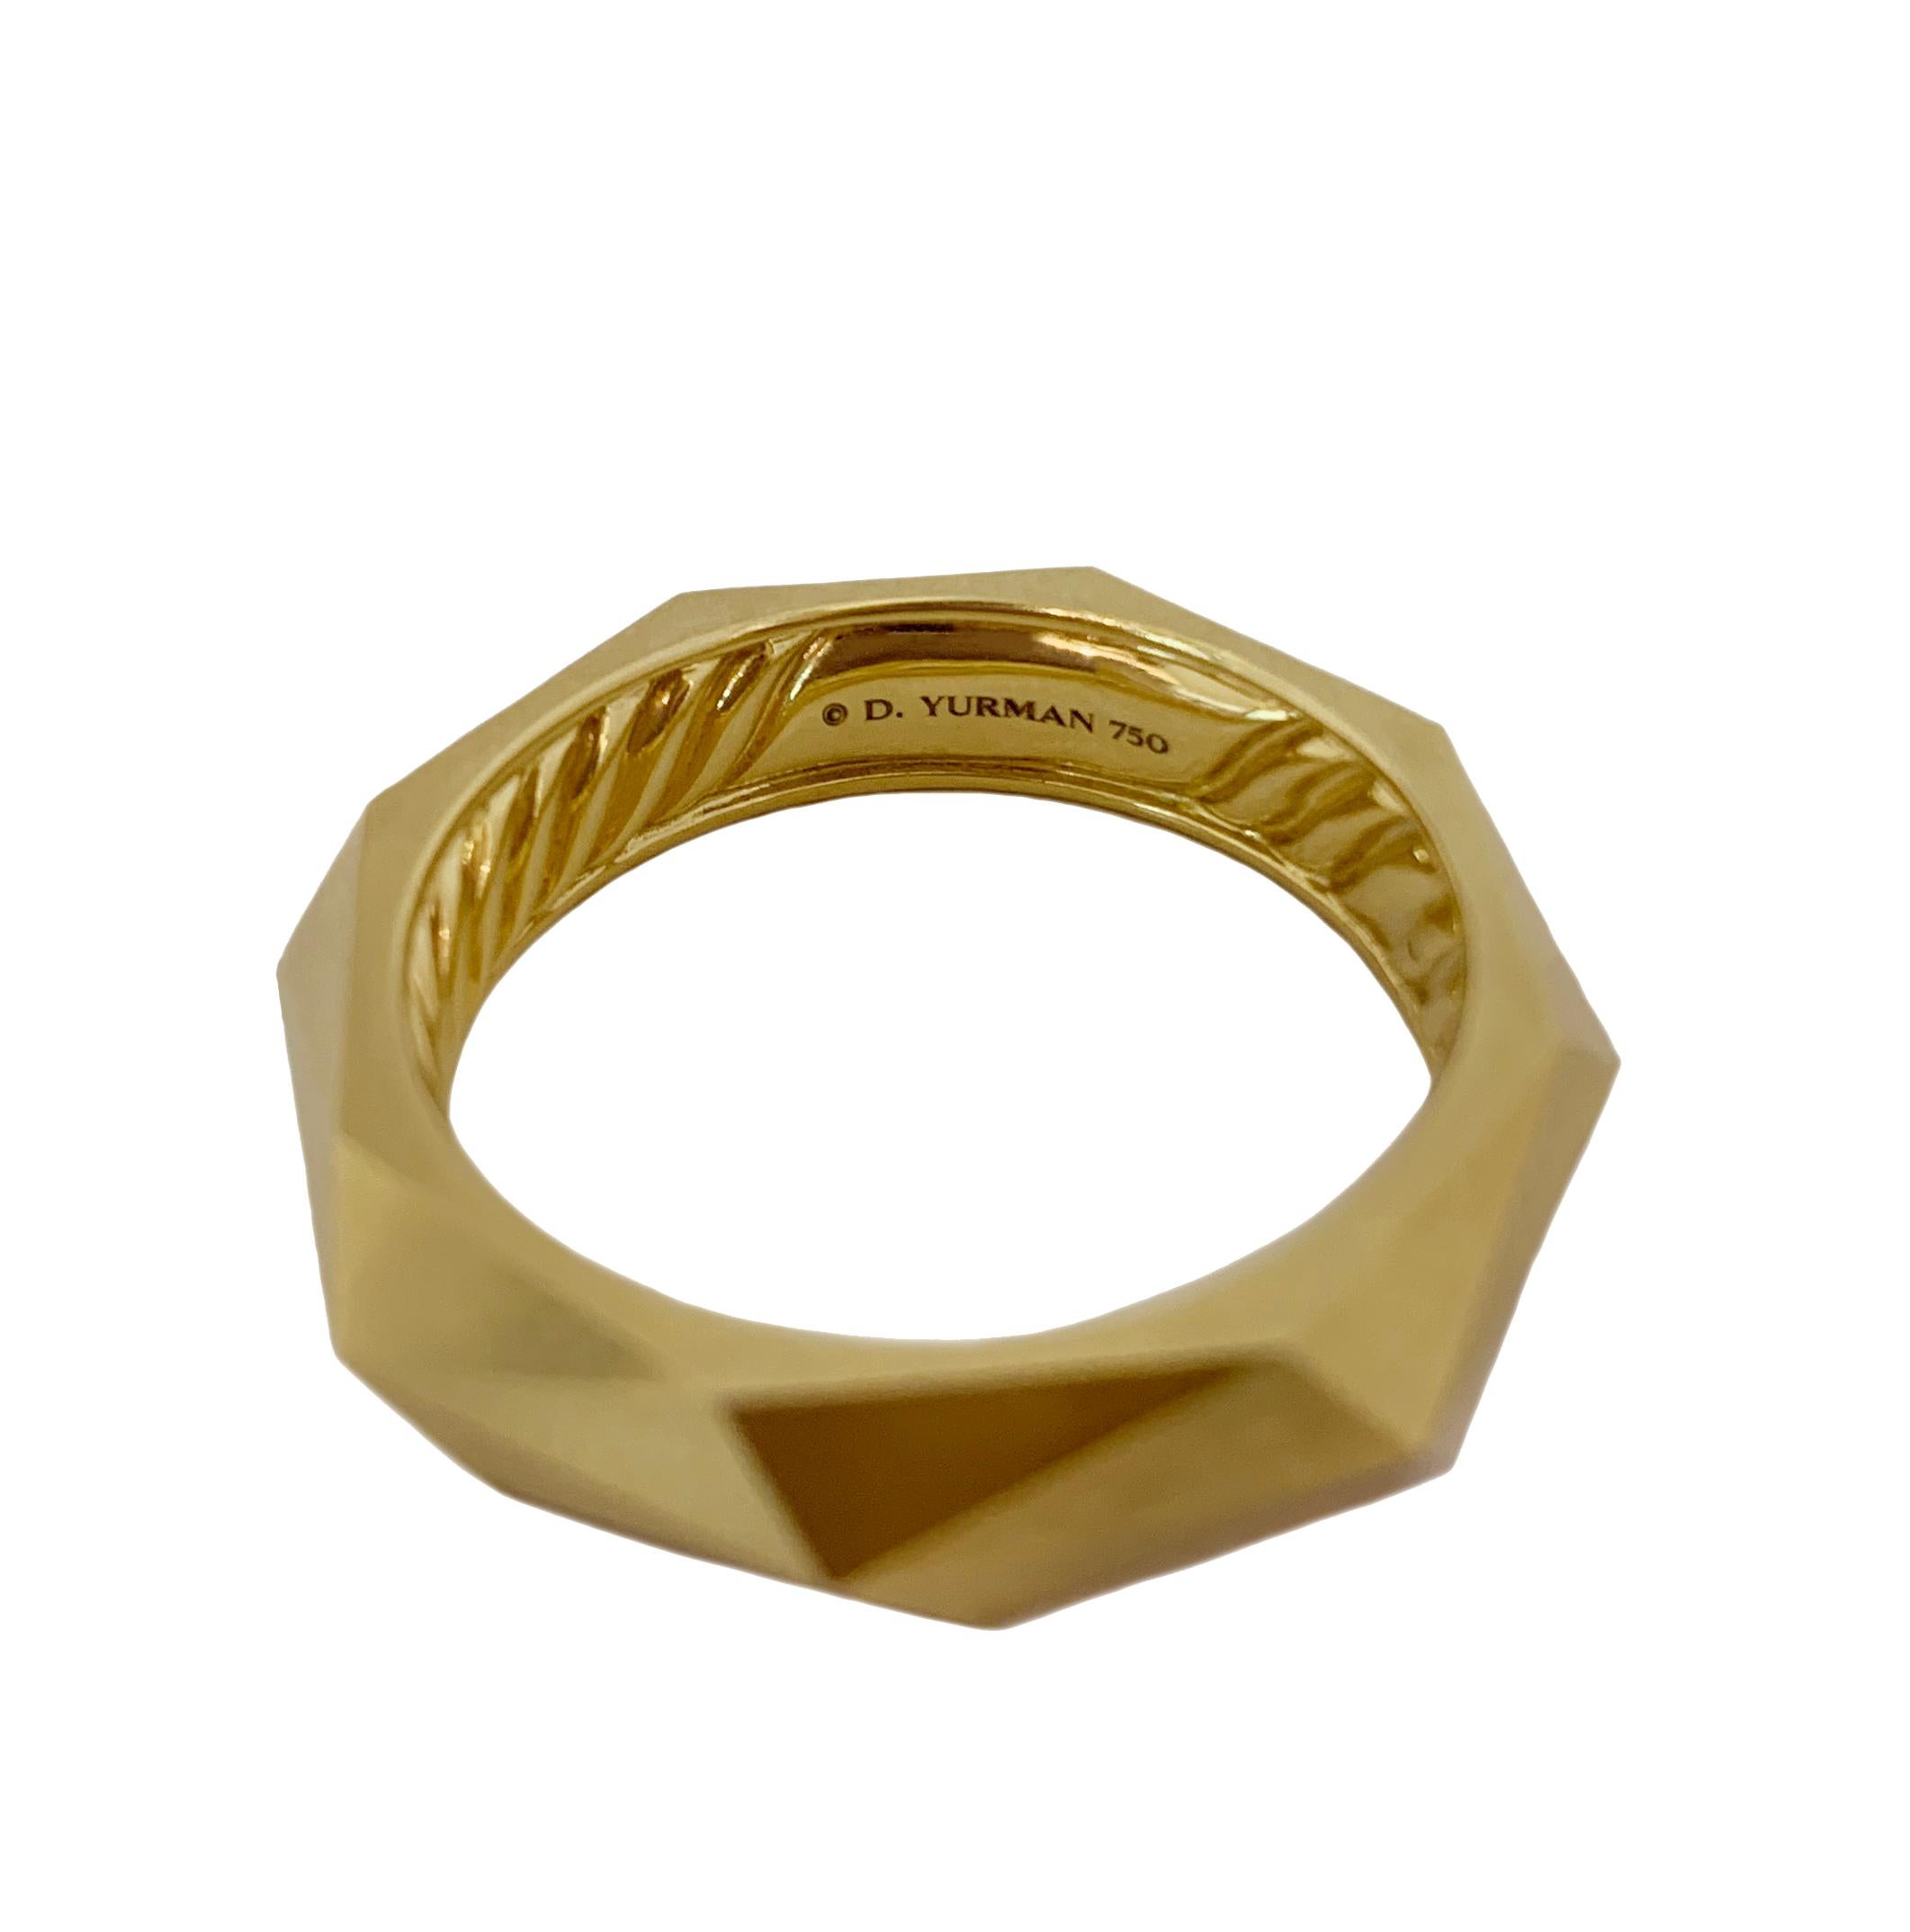 -Mint condition
-18k Yellow Gold
-Ring size: 11.5
-Width: 6mm
-Weight: 11.3gr 
-Comes with David Yurman box
-Retail: $2900